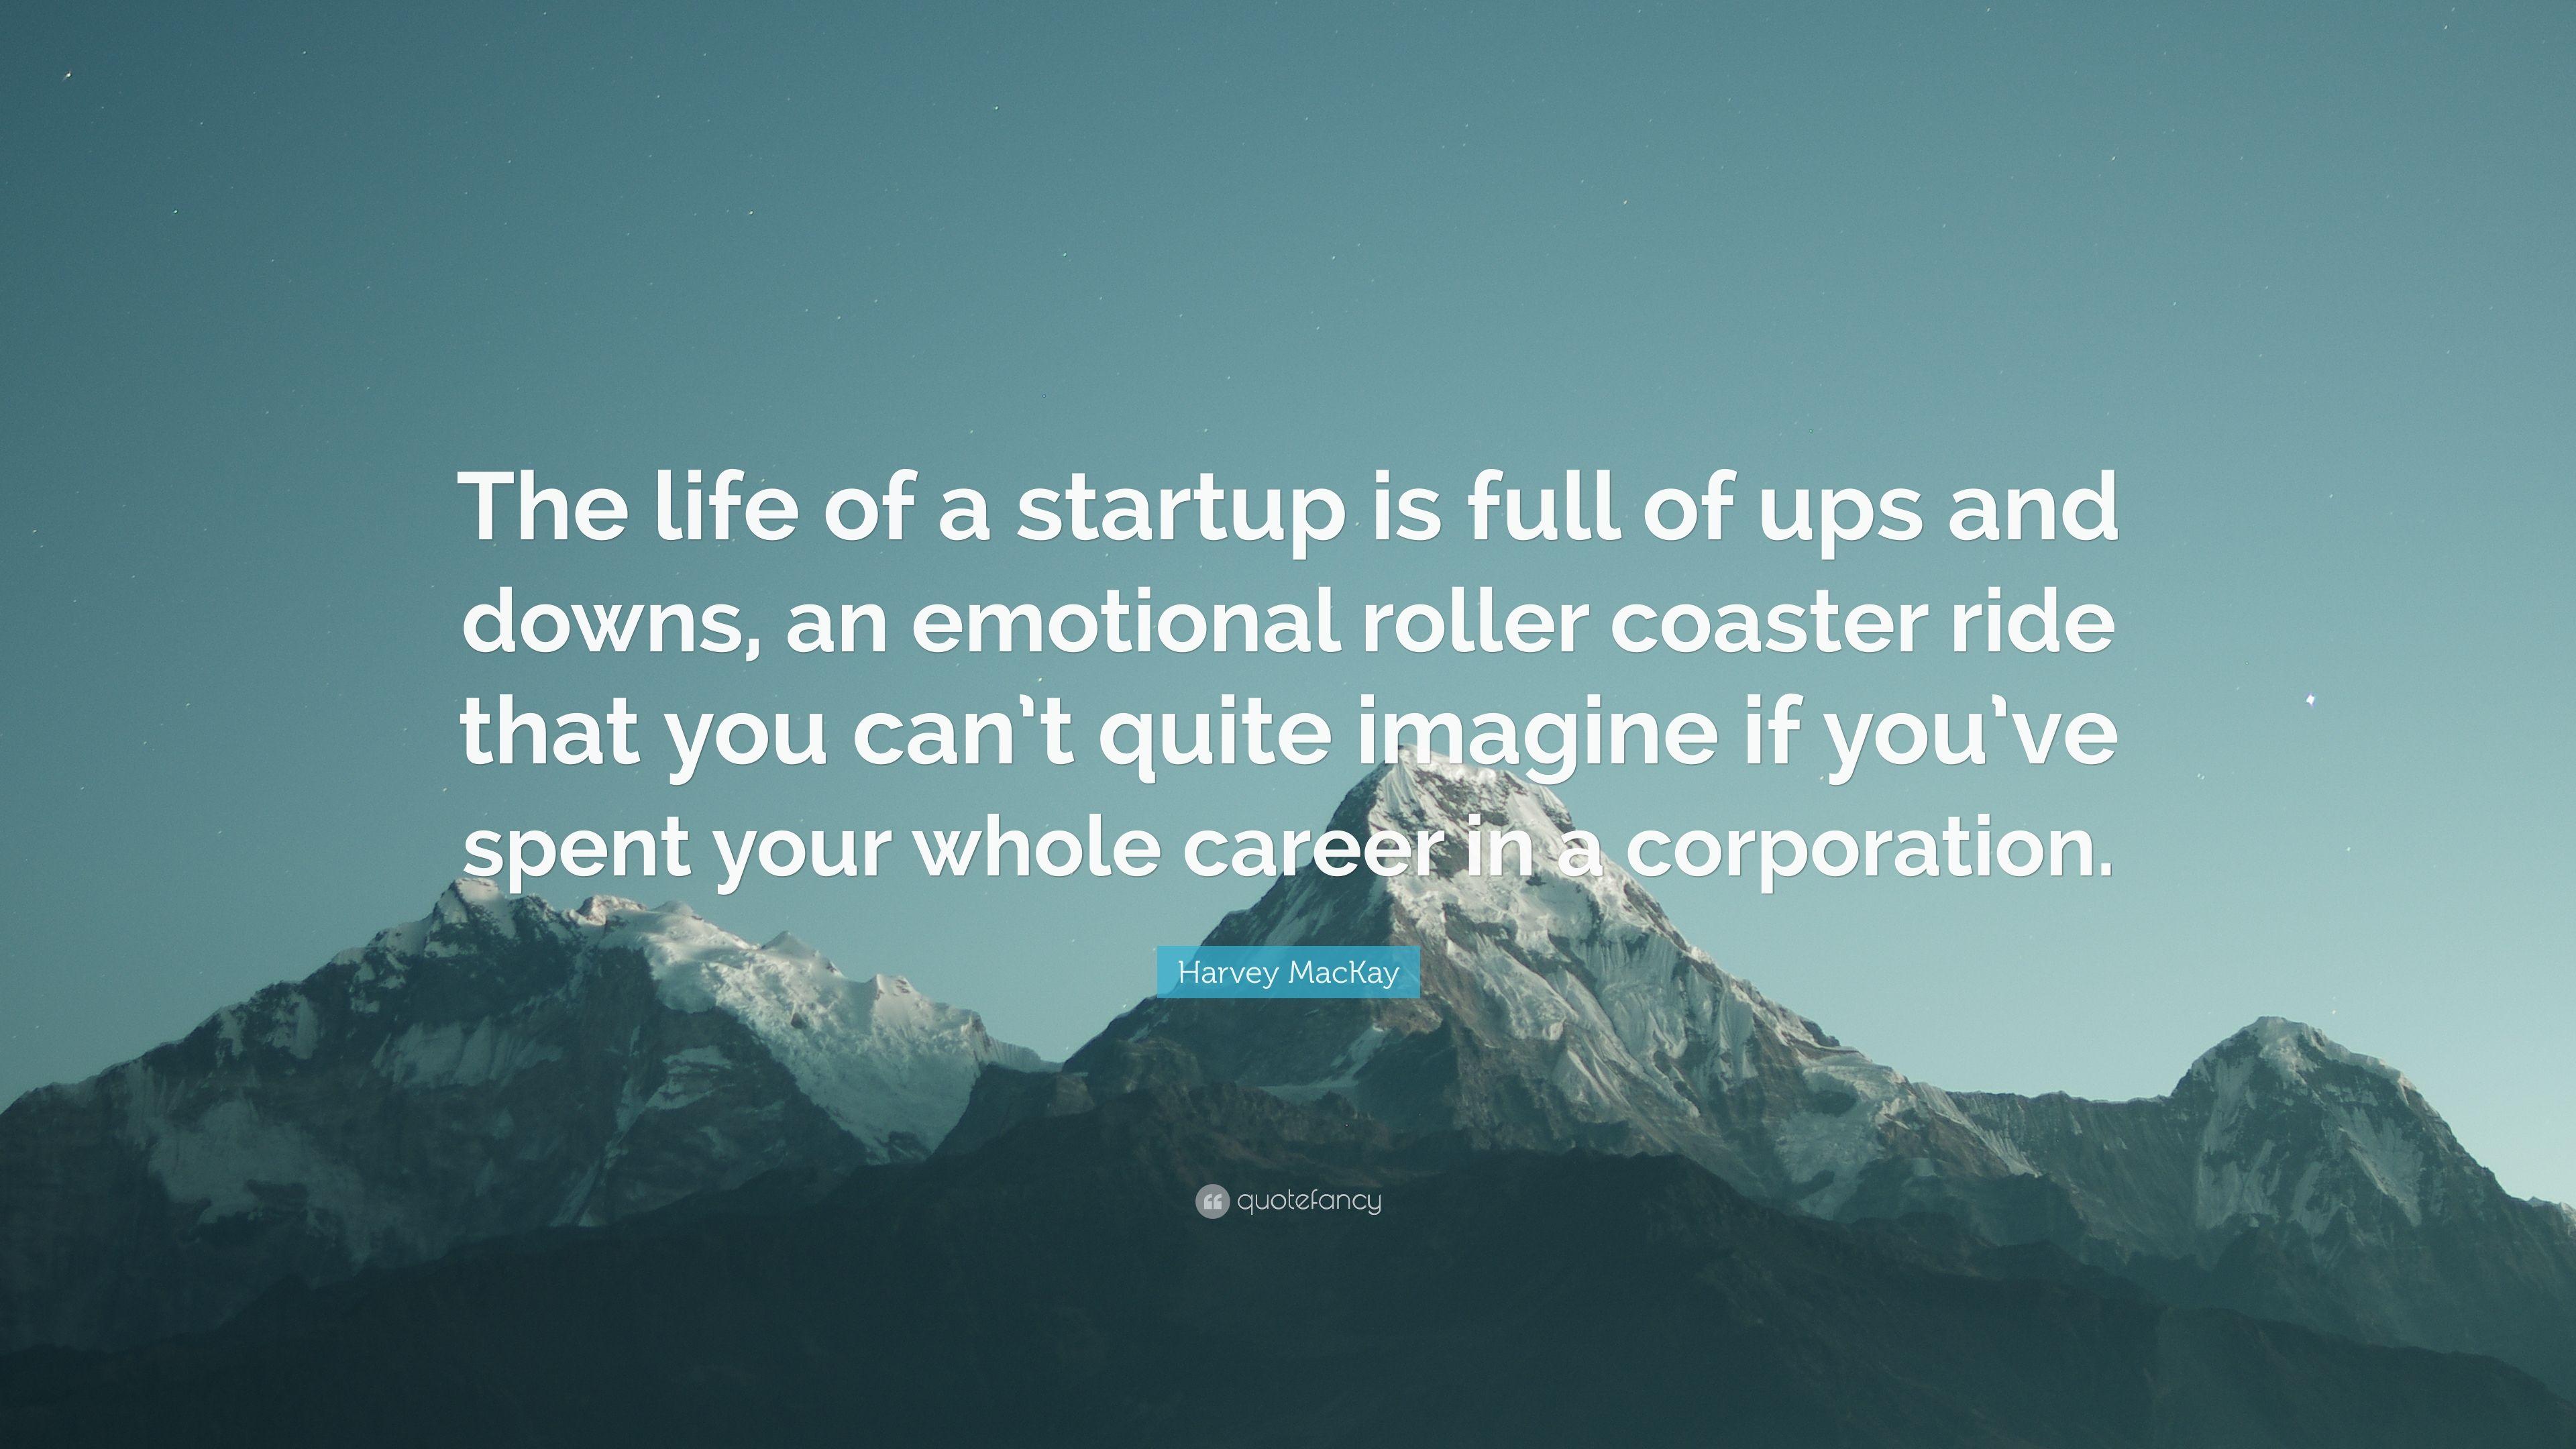 Harvey MacKay Quote: “The life of a startup is full of ups and downs